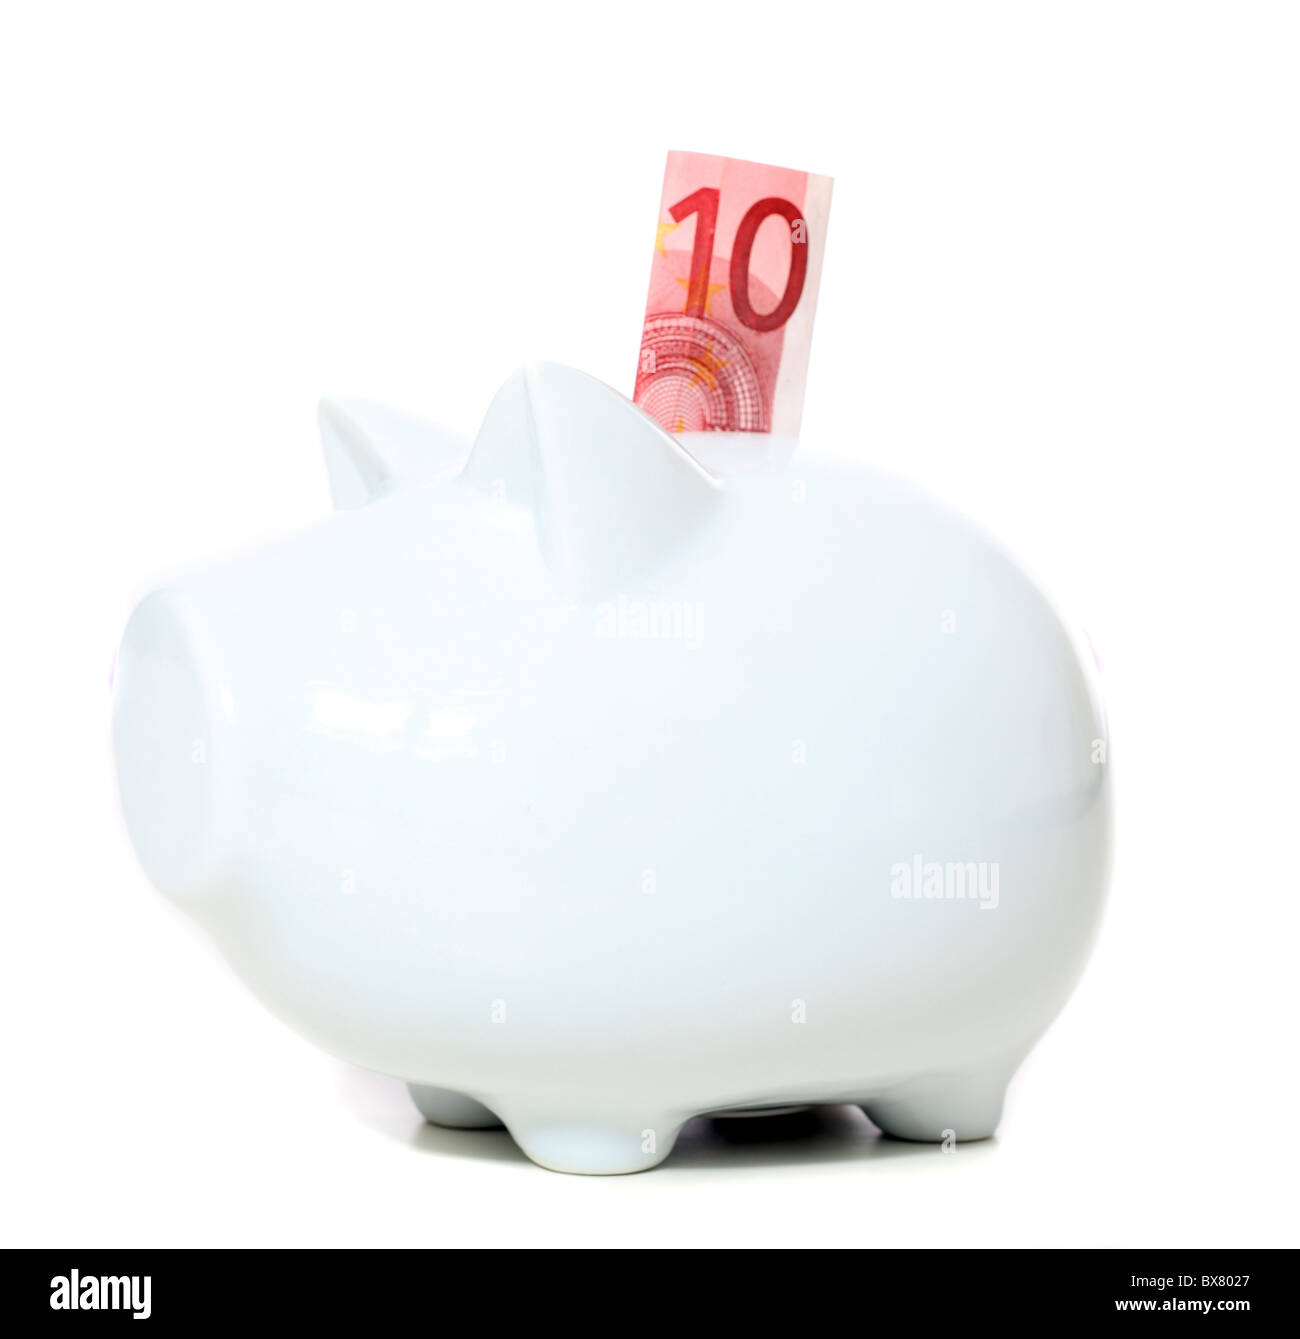 Piggy bank with 10 Euro note. All isolated on white background Stock Photo